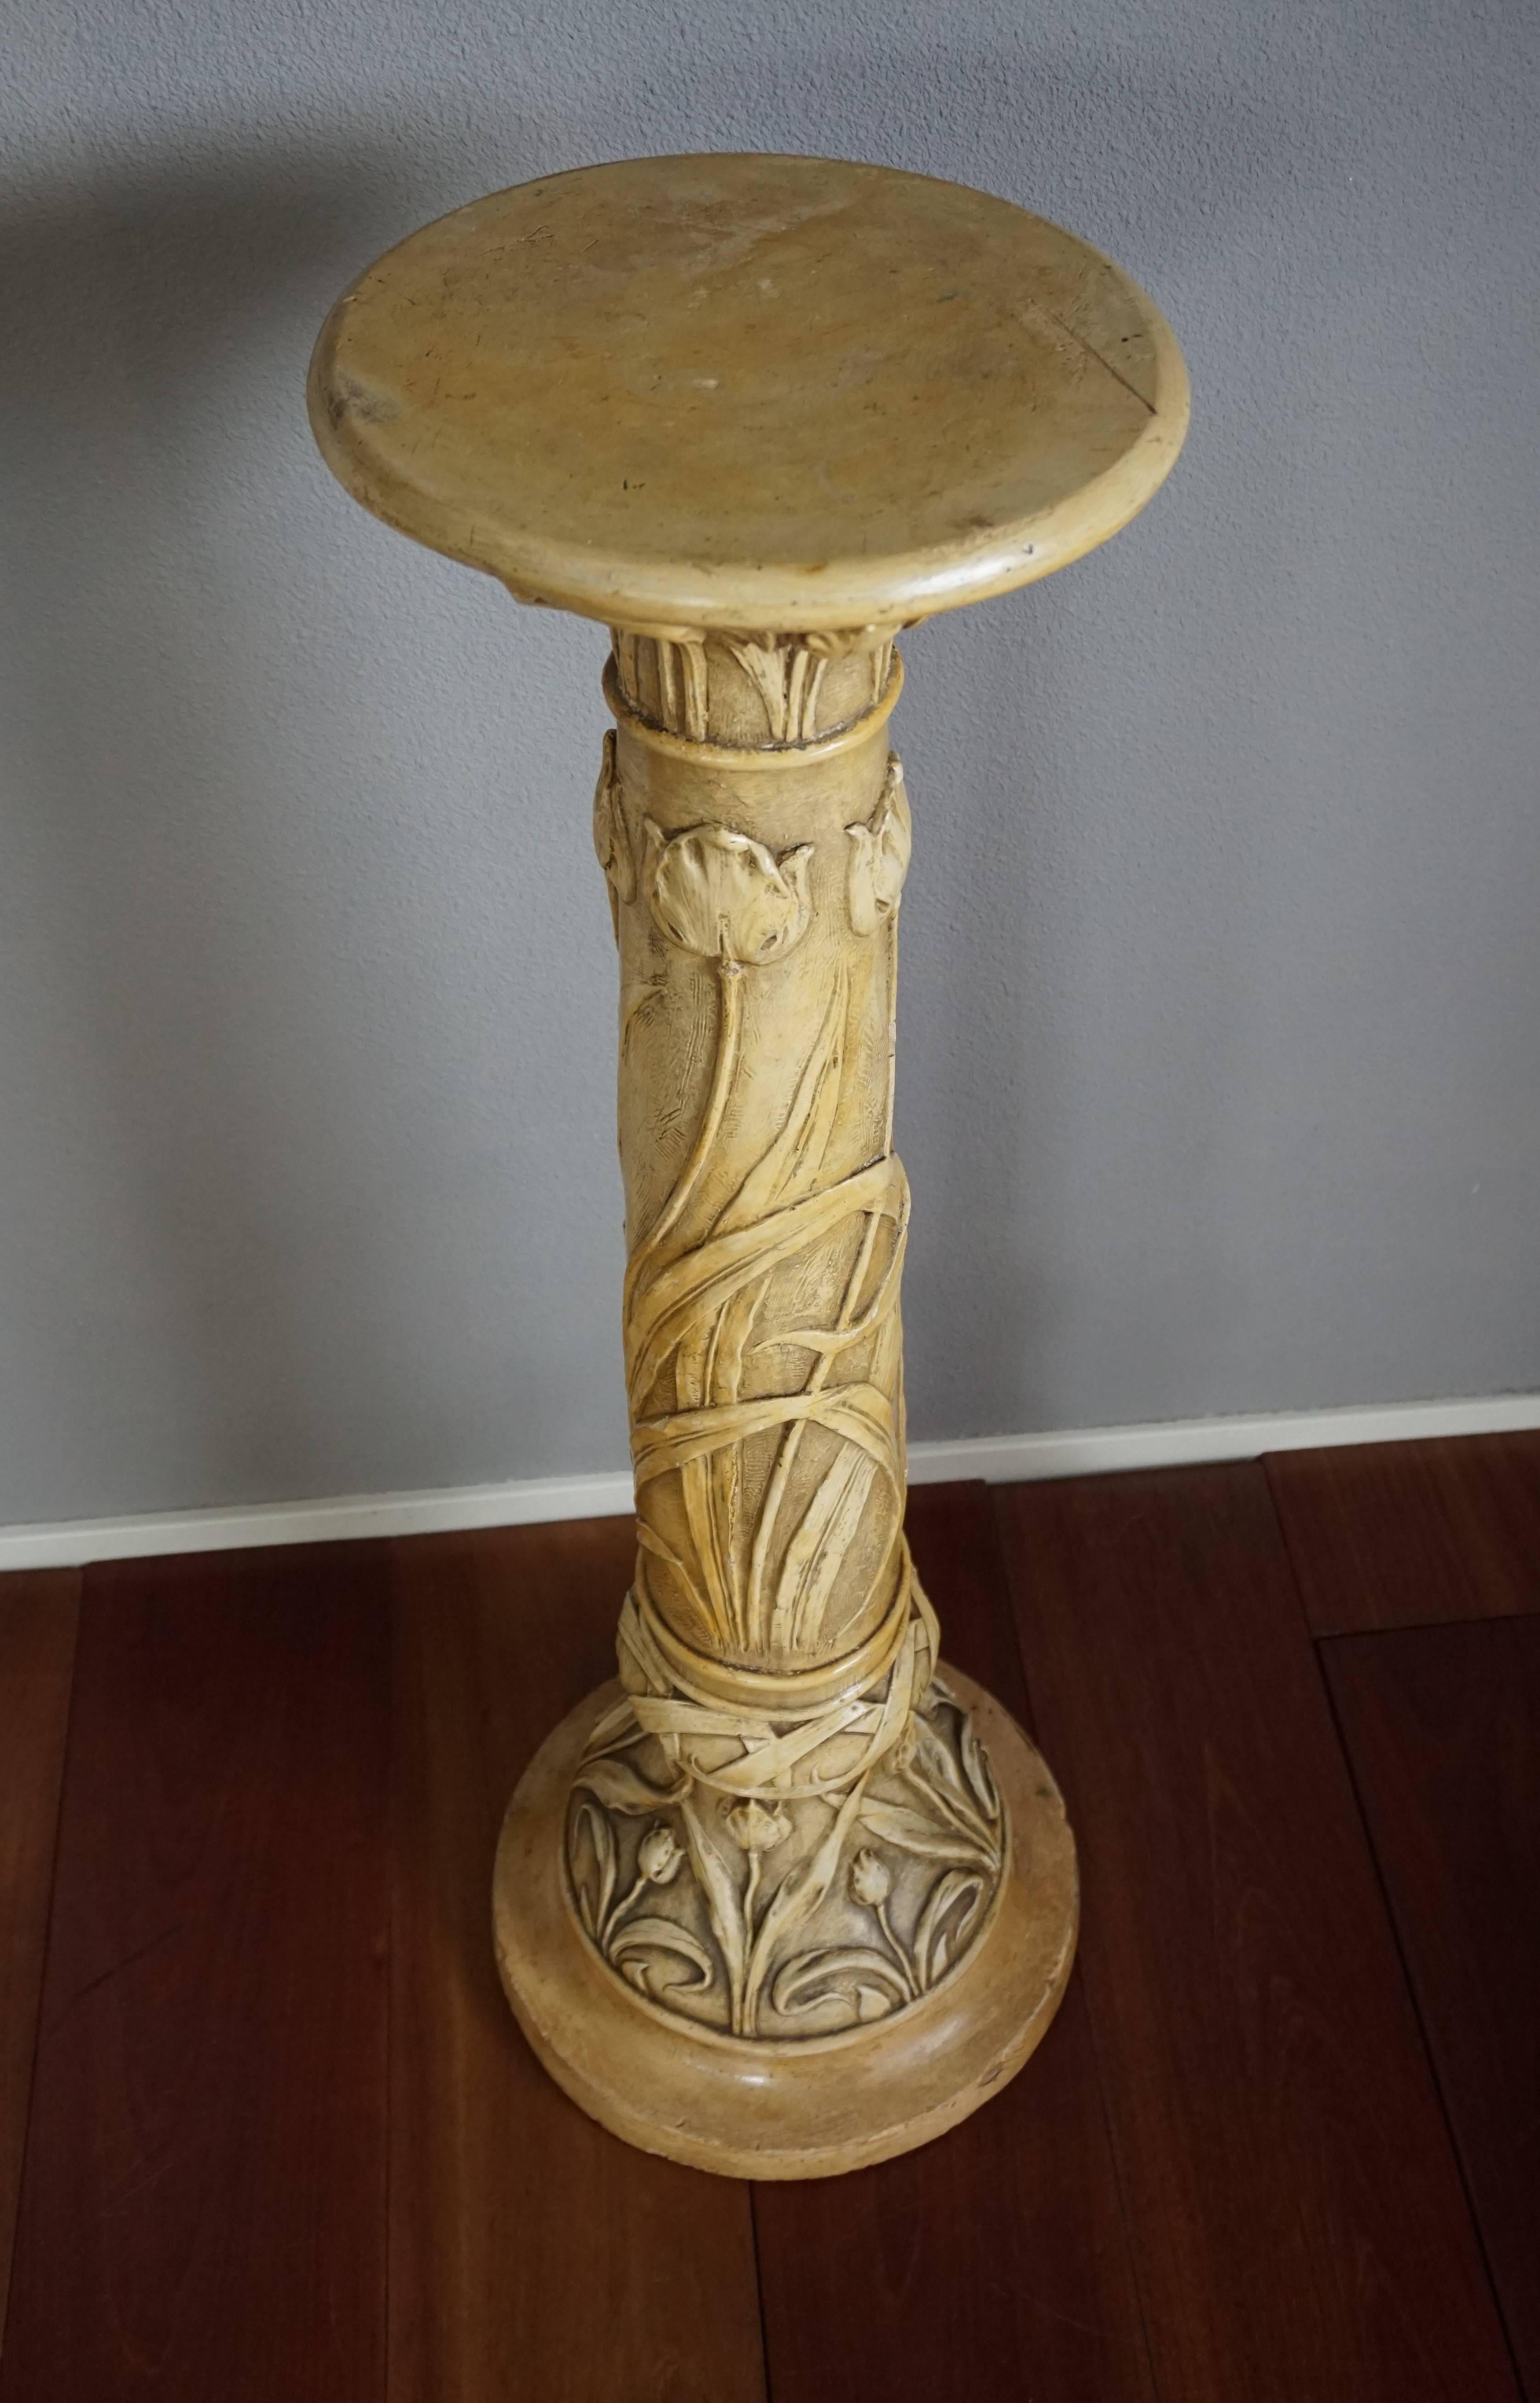 Hand-Crafted Art Nouveau One-Piece Plaster Plant Stand with Flower Decor and Signature